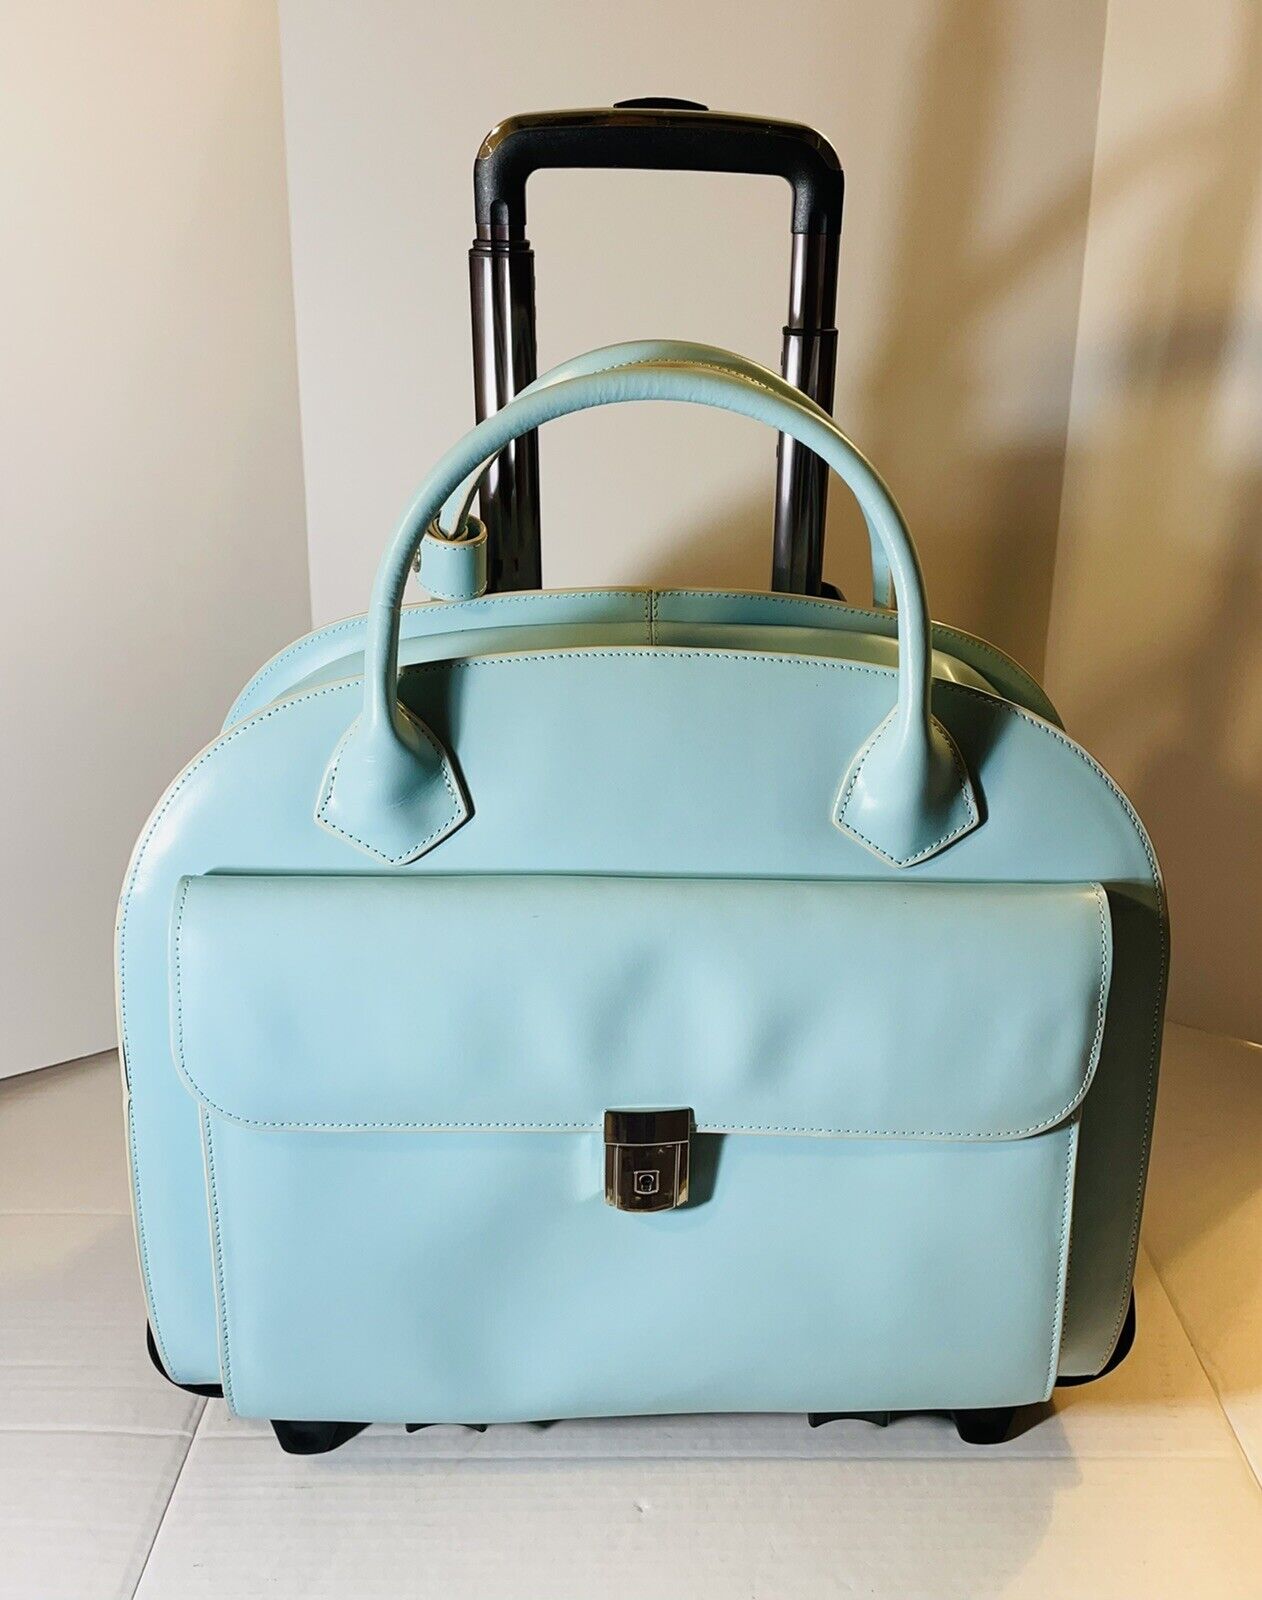 McKlein USA Glen Ellyn Turquoise Leather Patented 2 in 1 Detachable Wheeled Case